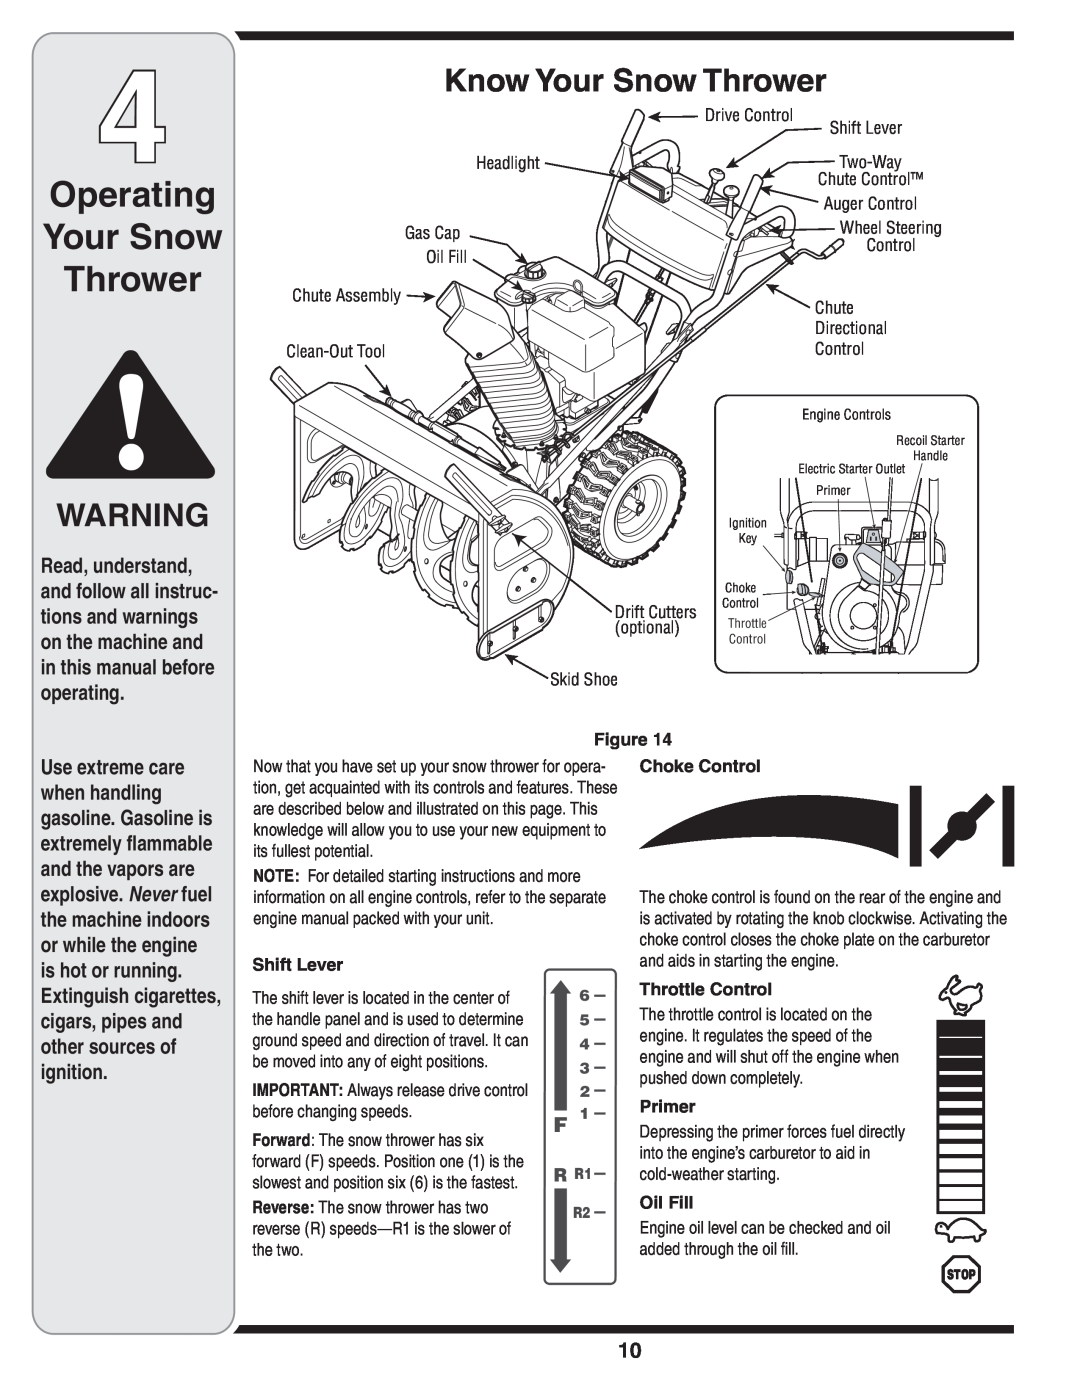 MTD 769-03342 Operating Your Snow Thrower, Know Your Snow Thrower, R R1, Shift Lever, be moved into any of eight positions 